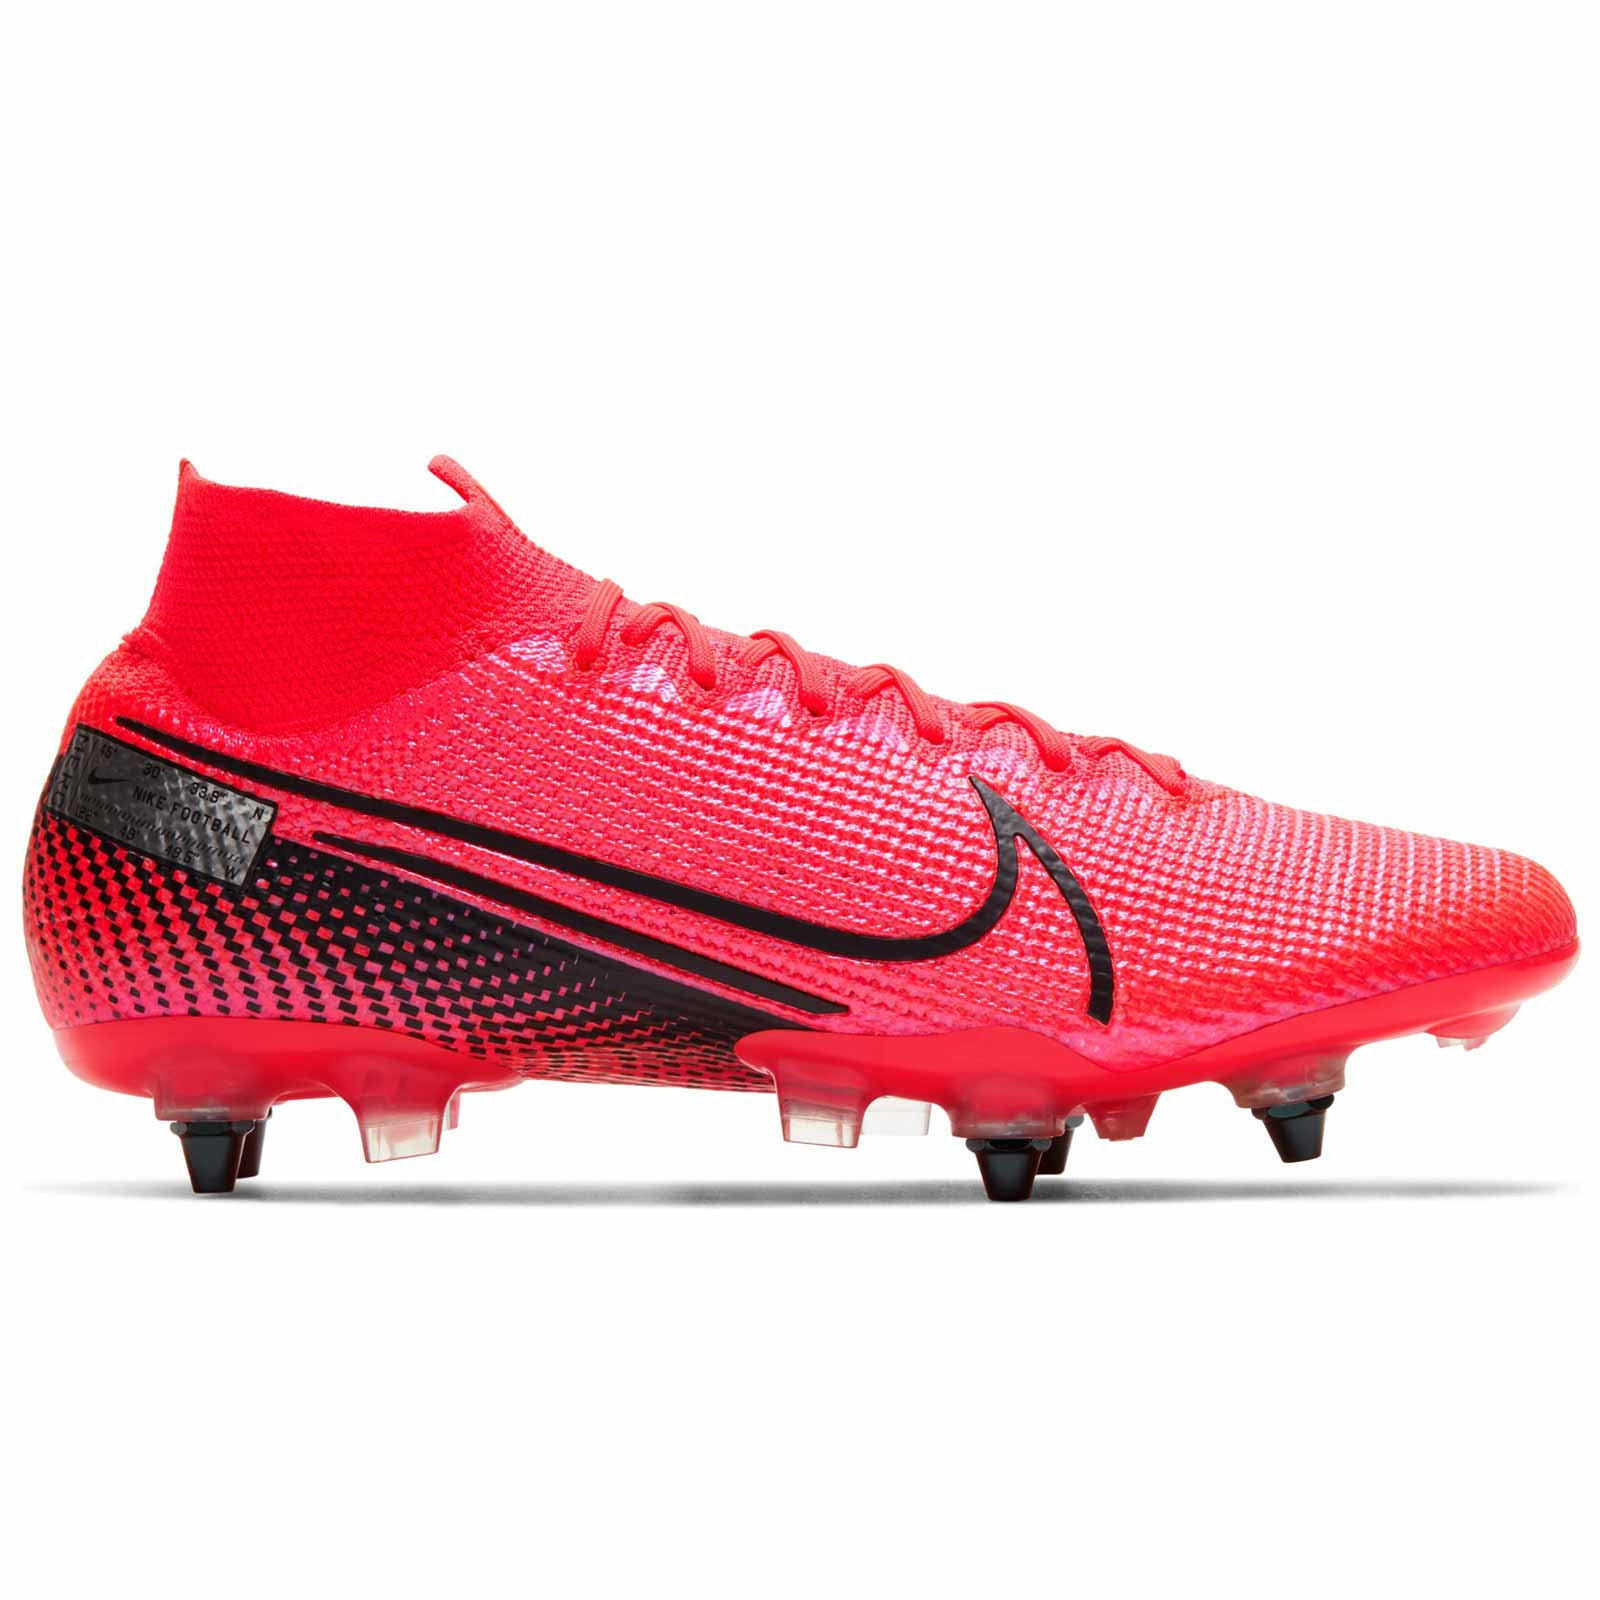 Nike Mercurial Superfly 7 Pro MDS FG Soccer Cleats.